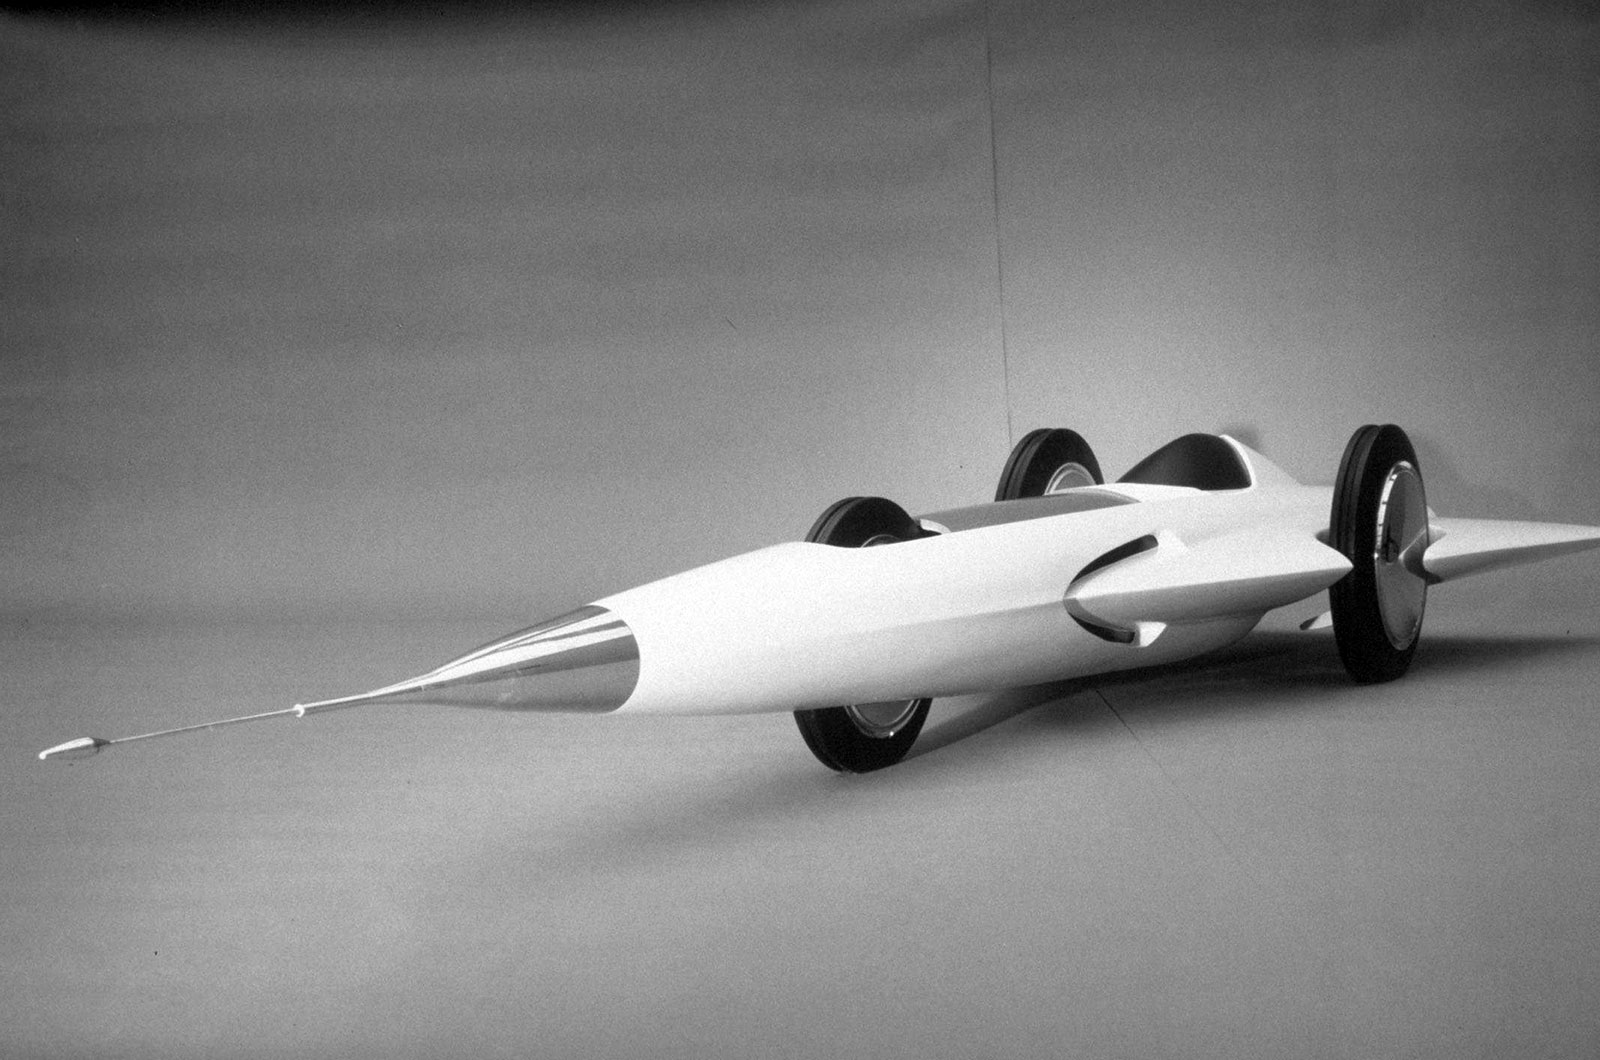 <p>Dreamed up by <strong>Alex Tremulis </strong>(1914-91), the three-wheeled Maxima was a rocket car designed to be propelled by a jet engine at speeds of up to 500mph. Way too radical to inspire any road cars, Craig Breedlove's <strong>Spirit of America </strong>land speed record car did take some of its styling cues from the Maxima.</p>